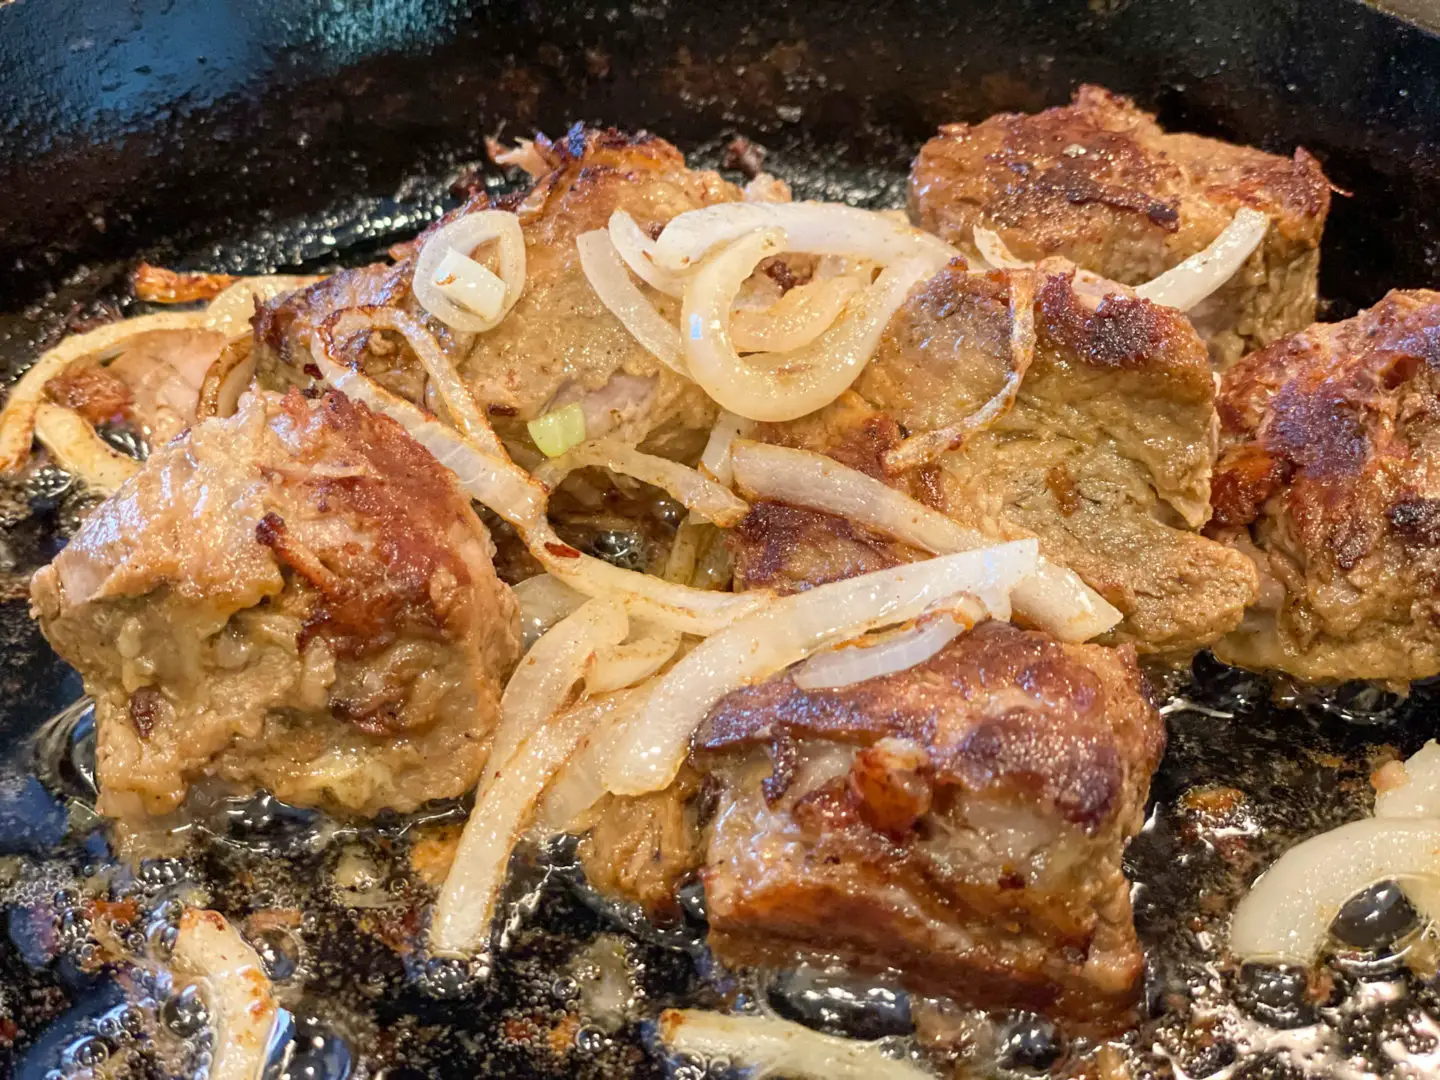 Masitas de puerco browning with onions in a cast iron skillet.